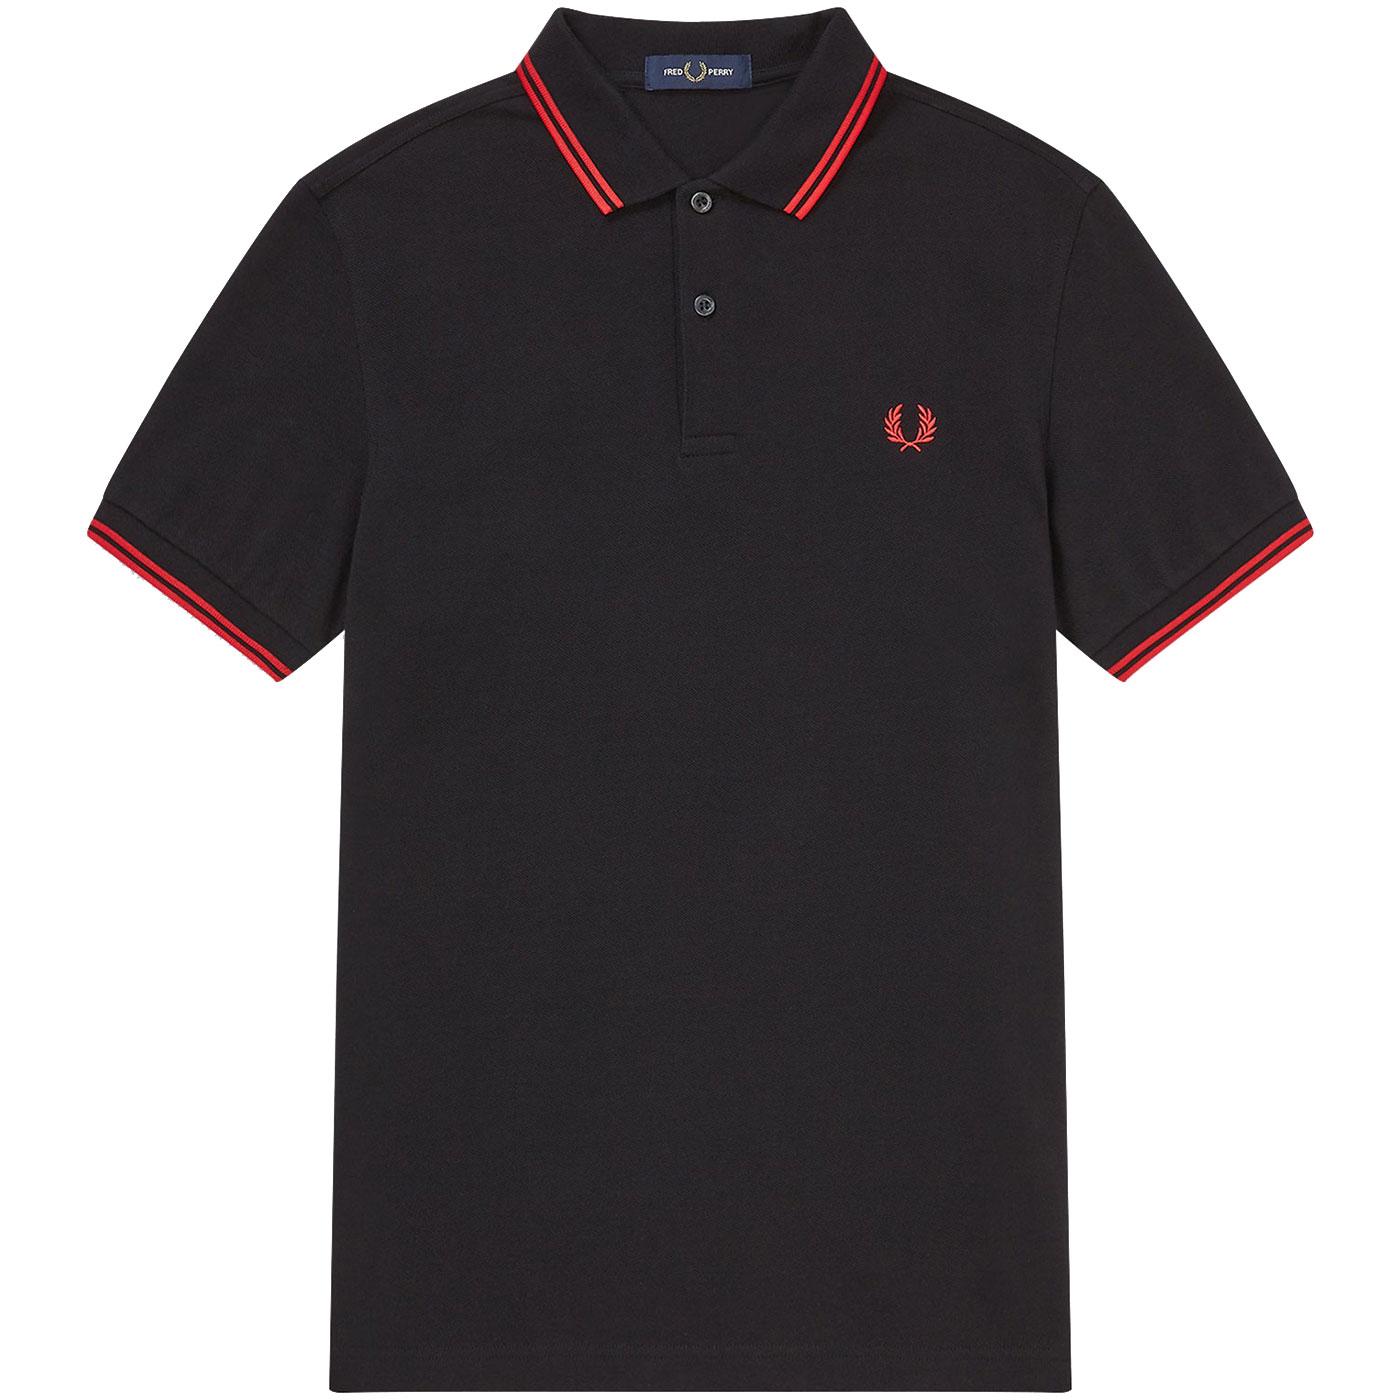 FRED PERRY M3600 Mod Twin Tipped Polo Shirt in Black